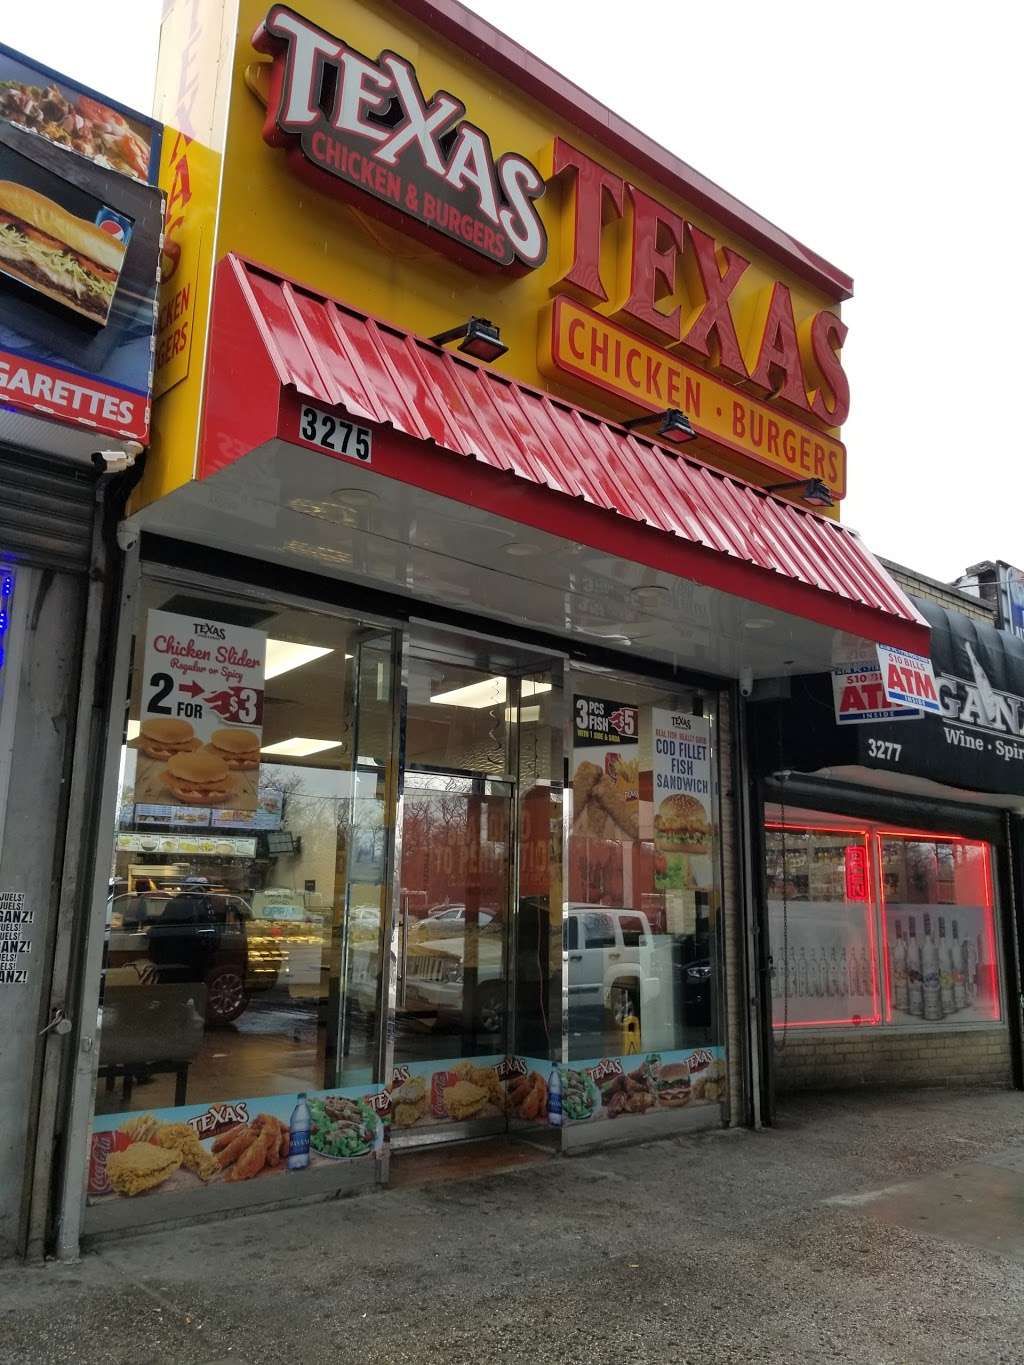 Texas Chicken & Burgers | 3275 Westchester Ave, The Bronx, NY 10461, USA